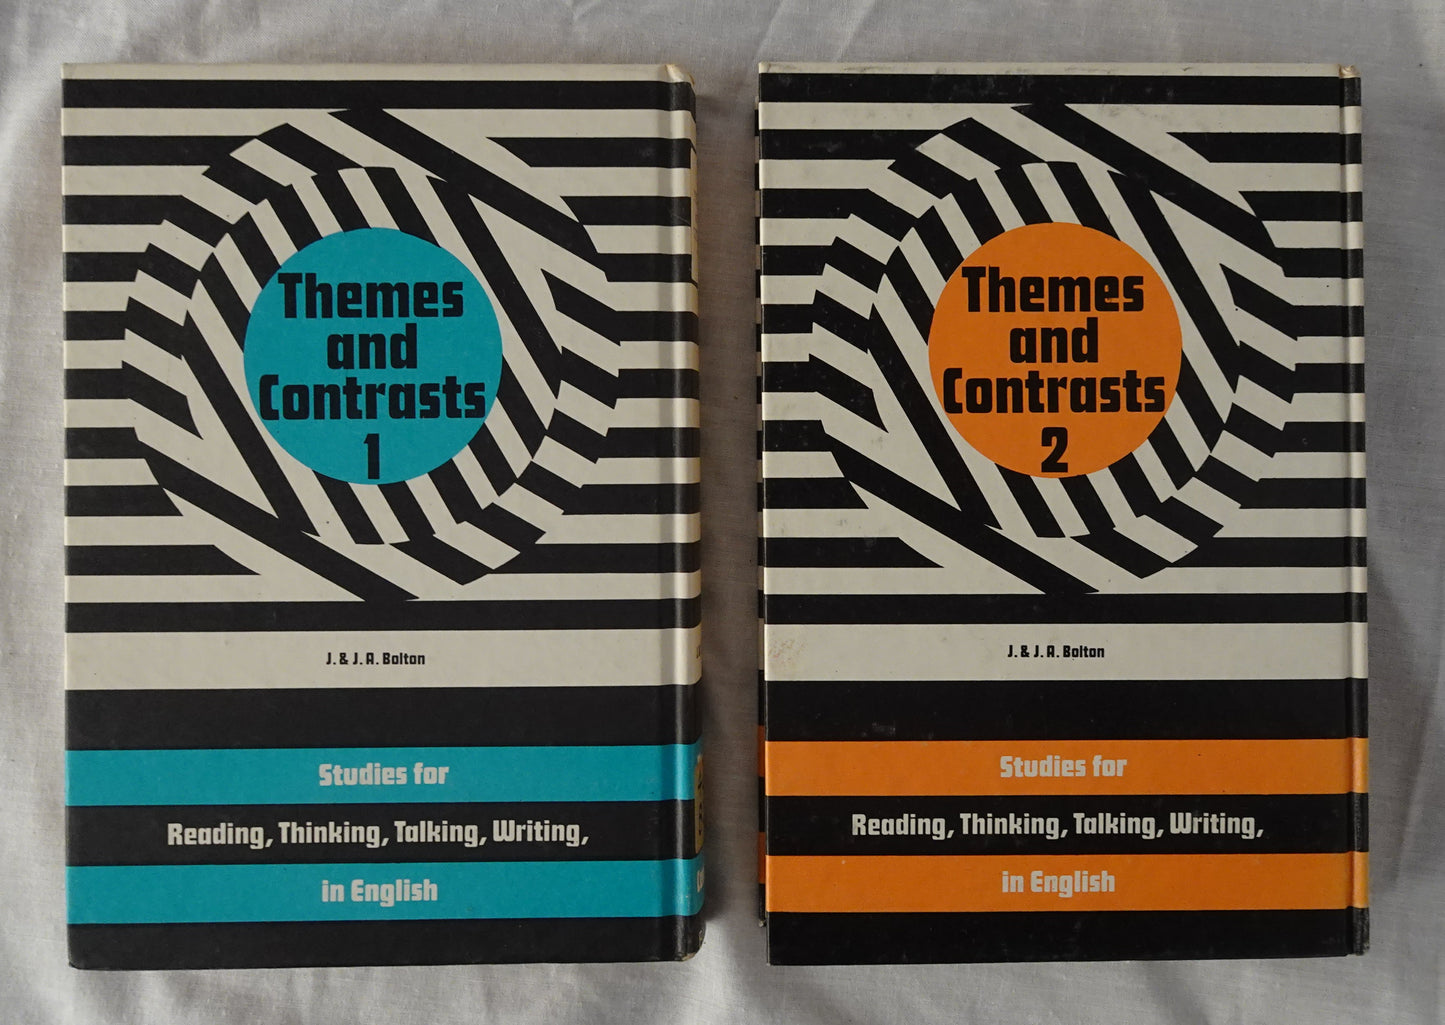 Themes and Contrasts by J. & J. A. Bolton